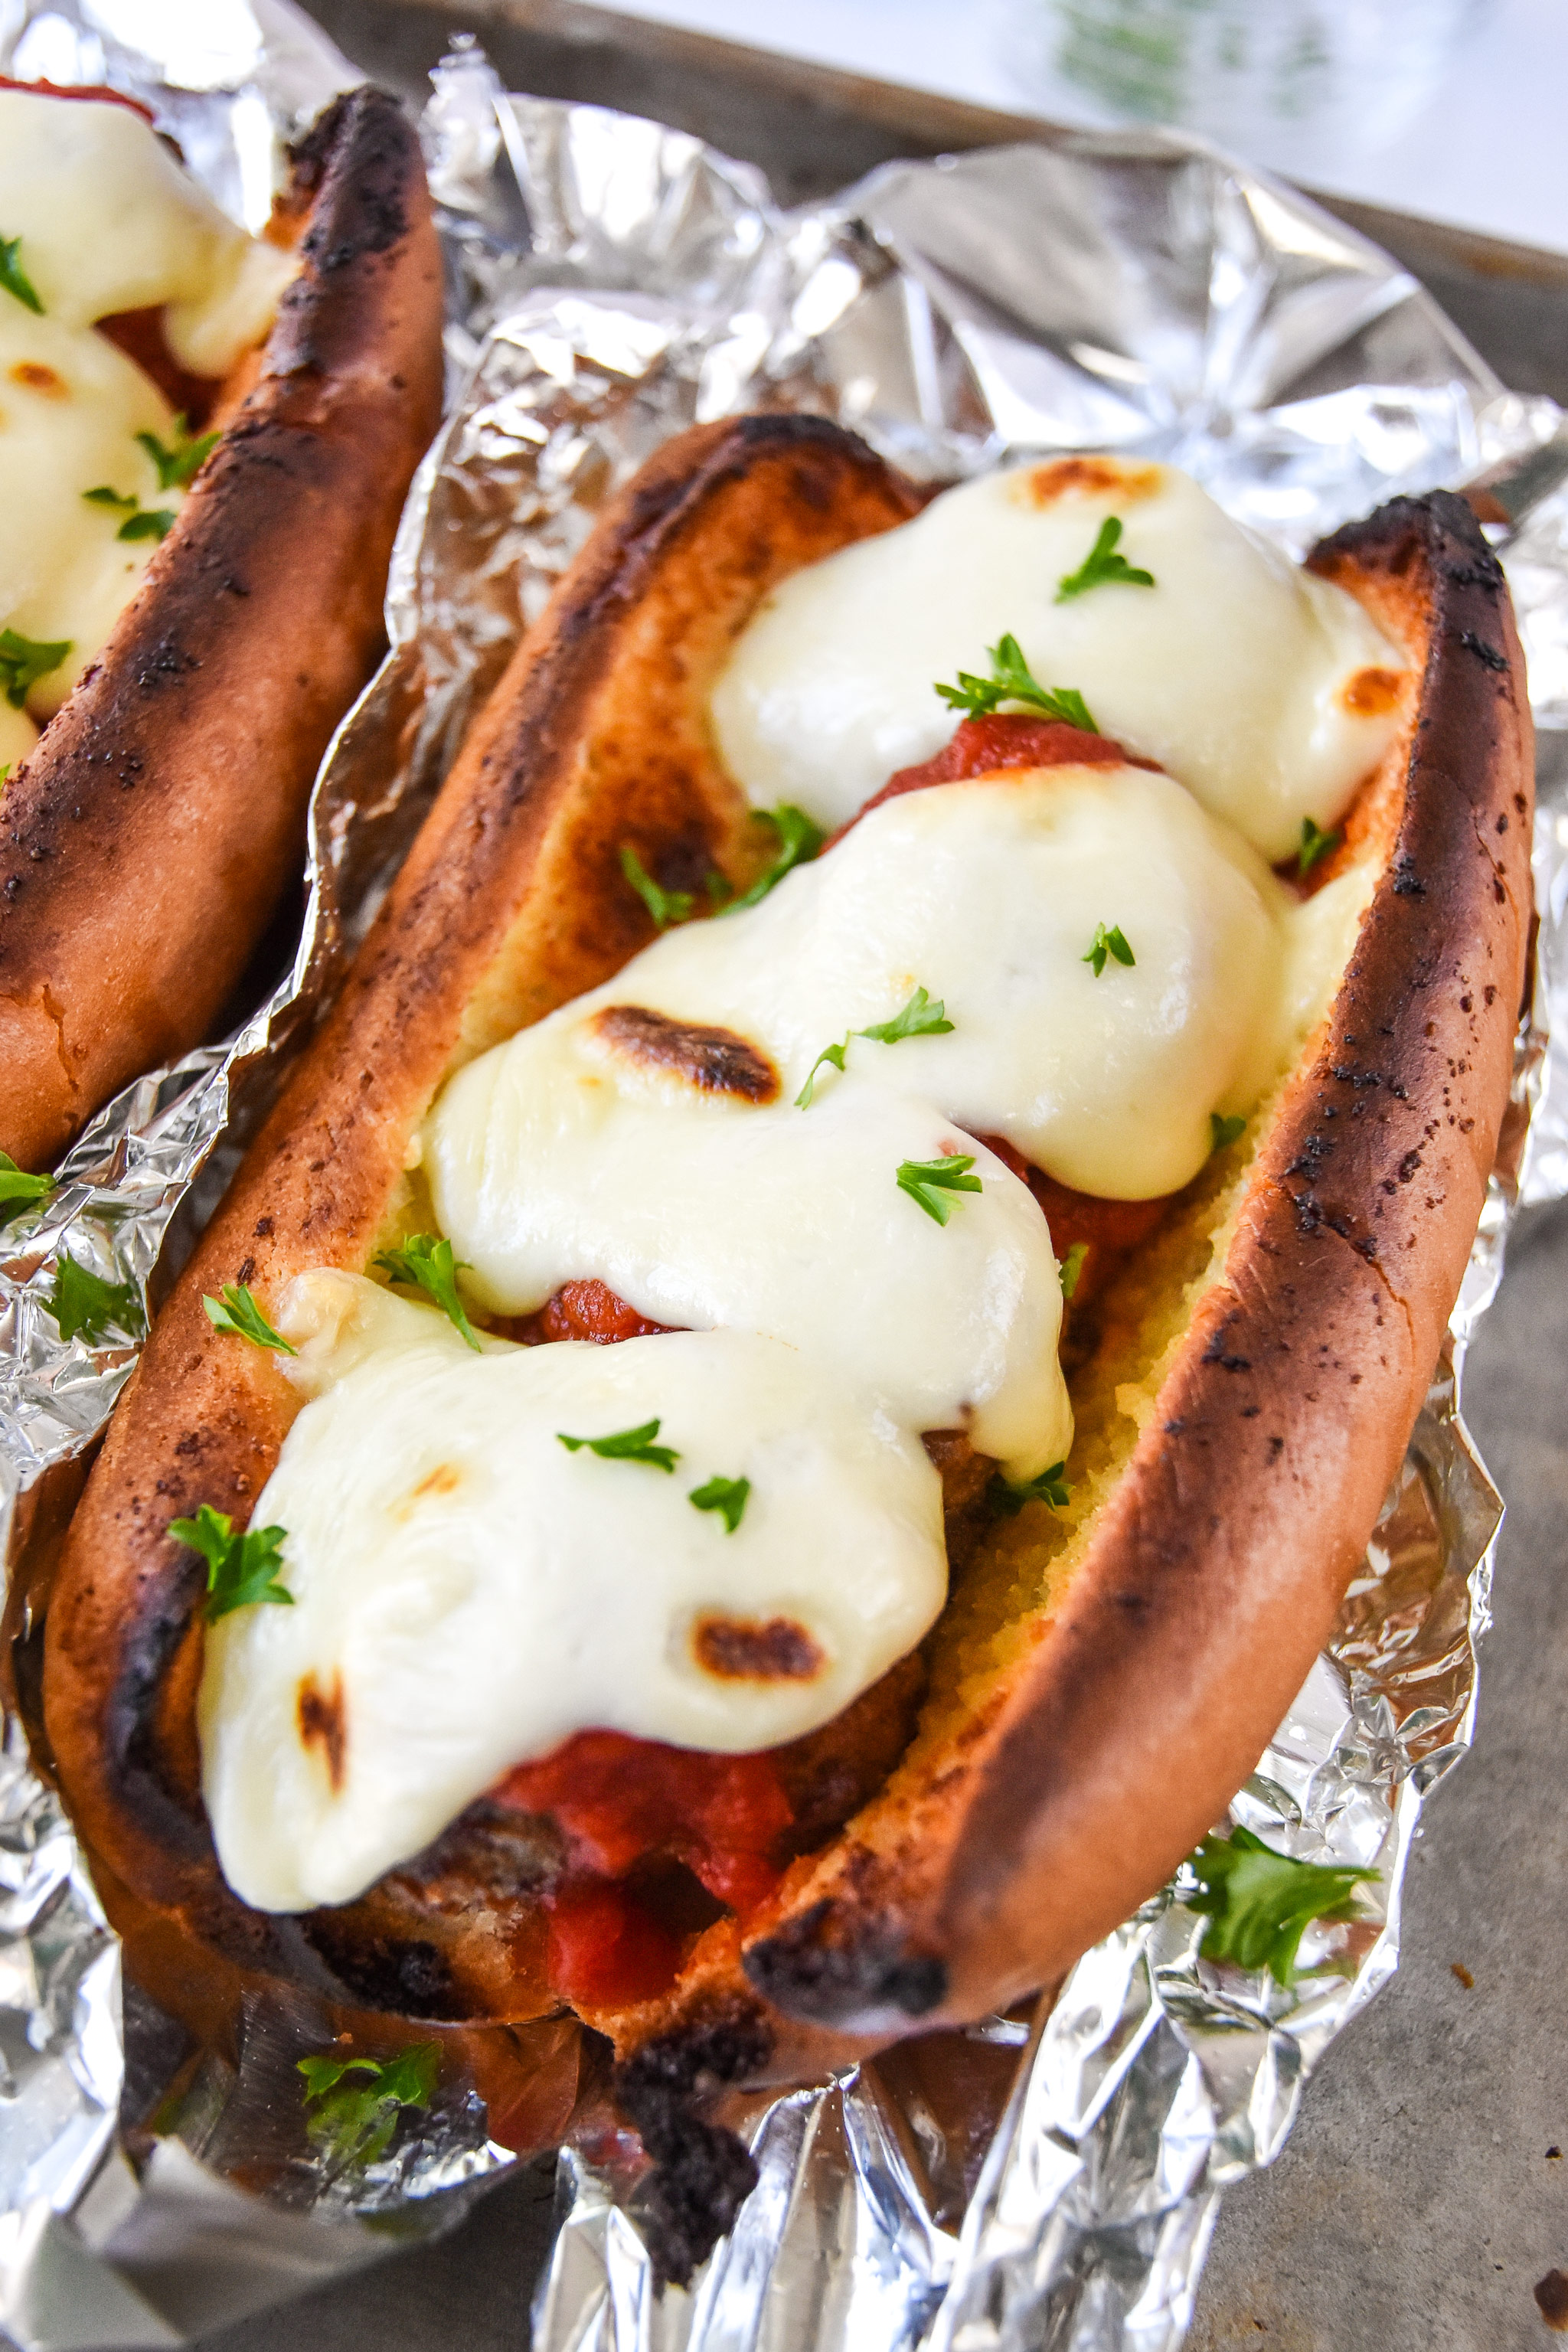 delicious meatball sub sandwich with melted mozzarella ready to be eaten.